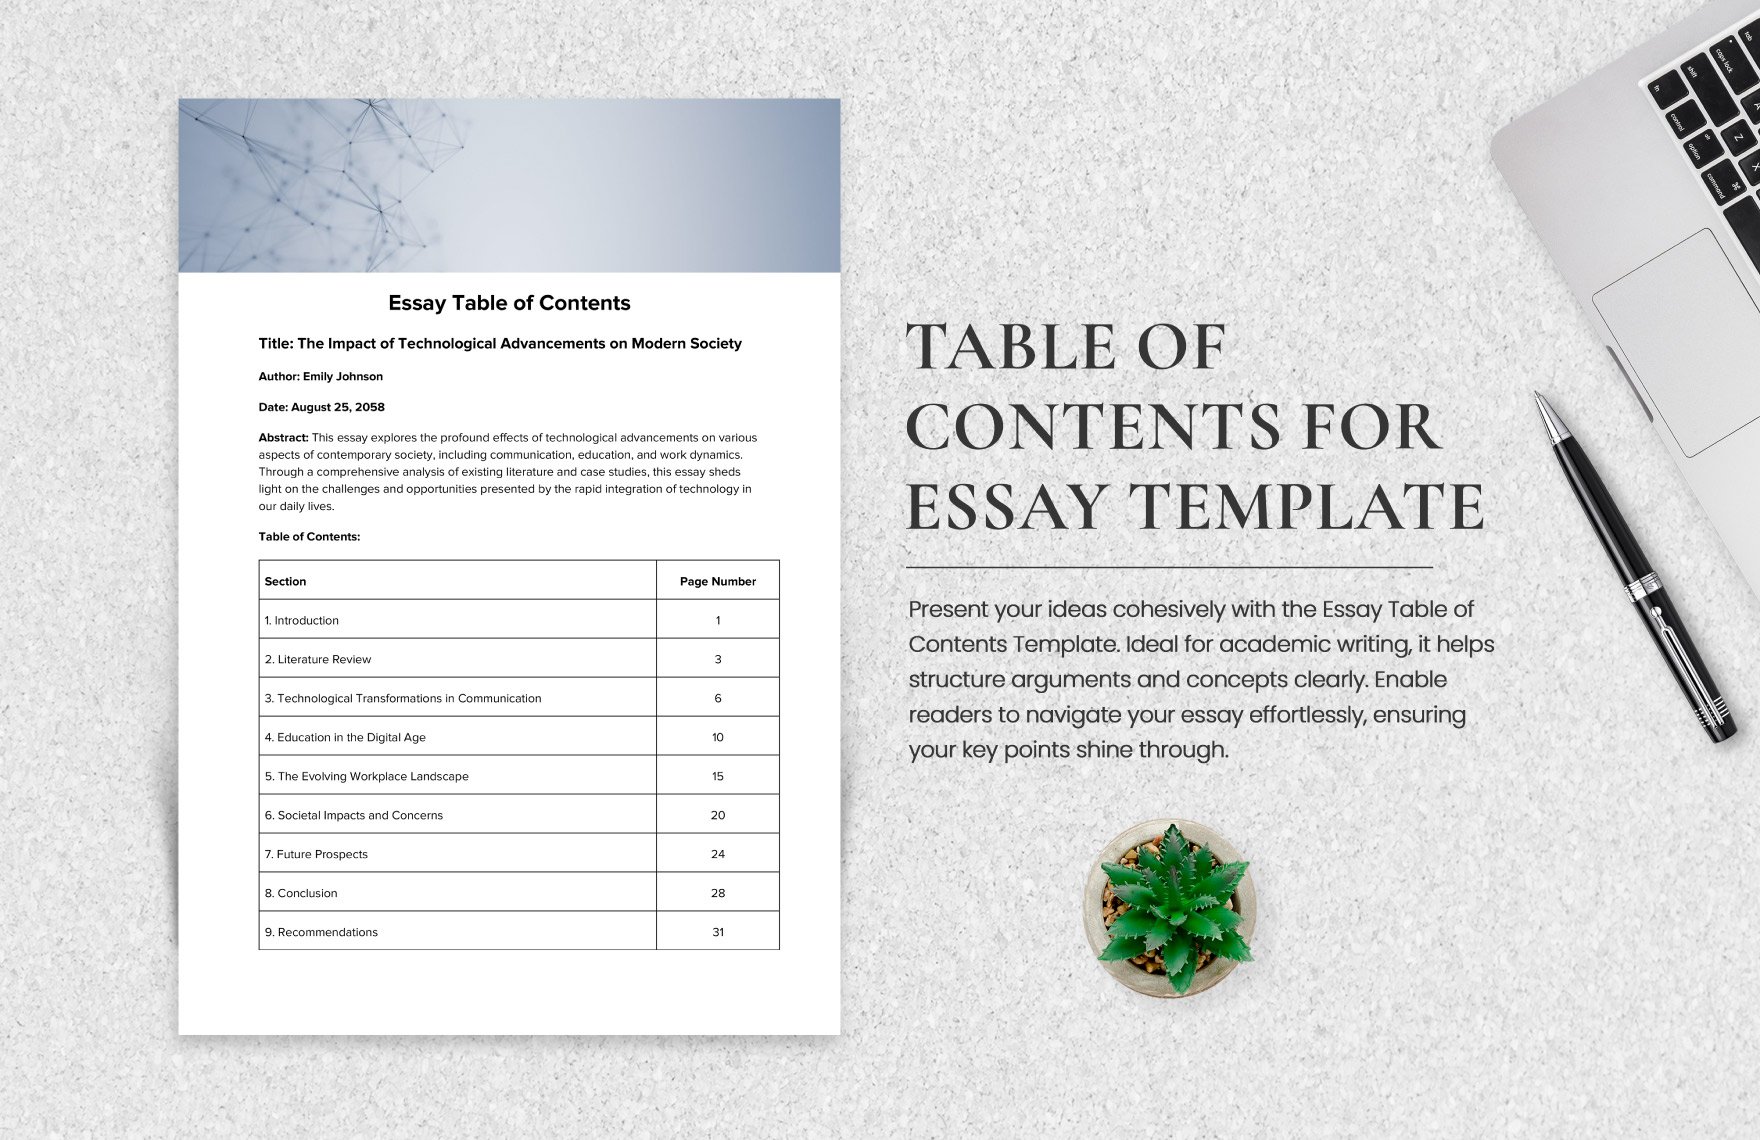 Free Essay Table of Contents Template